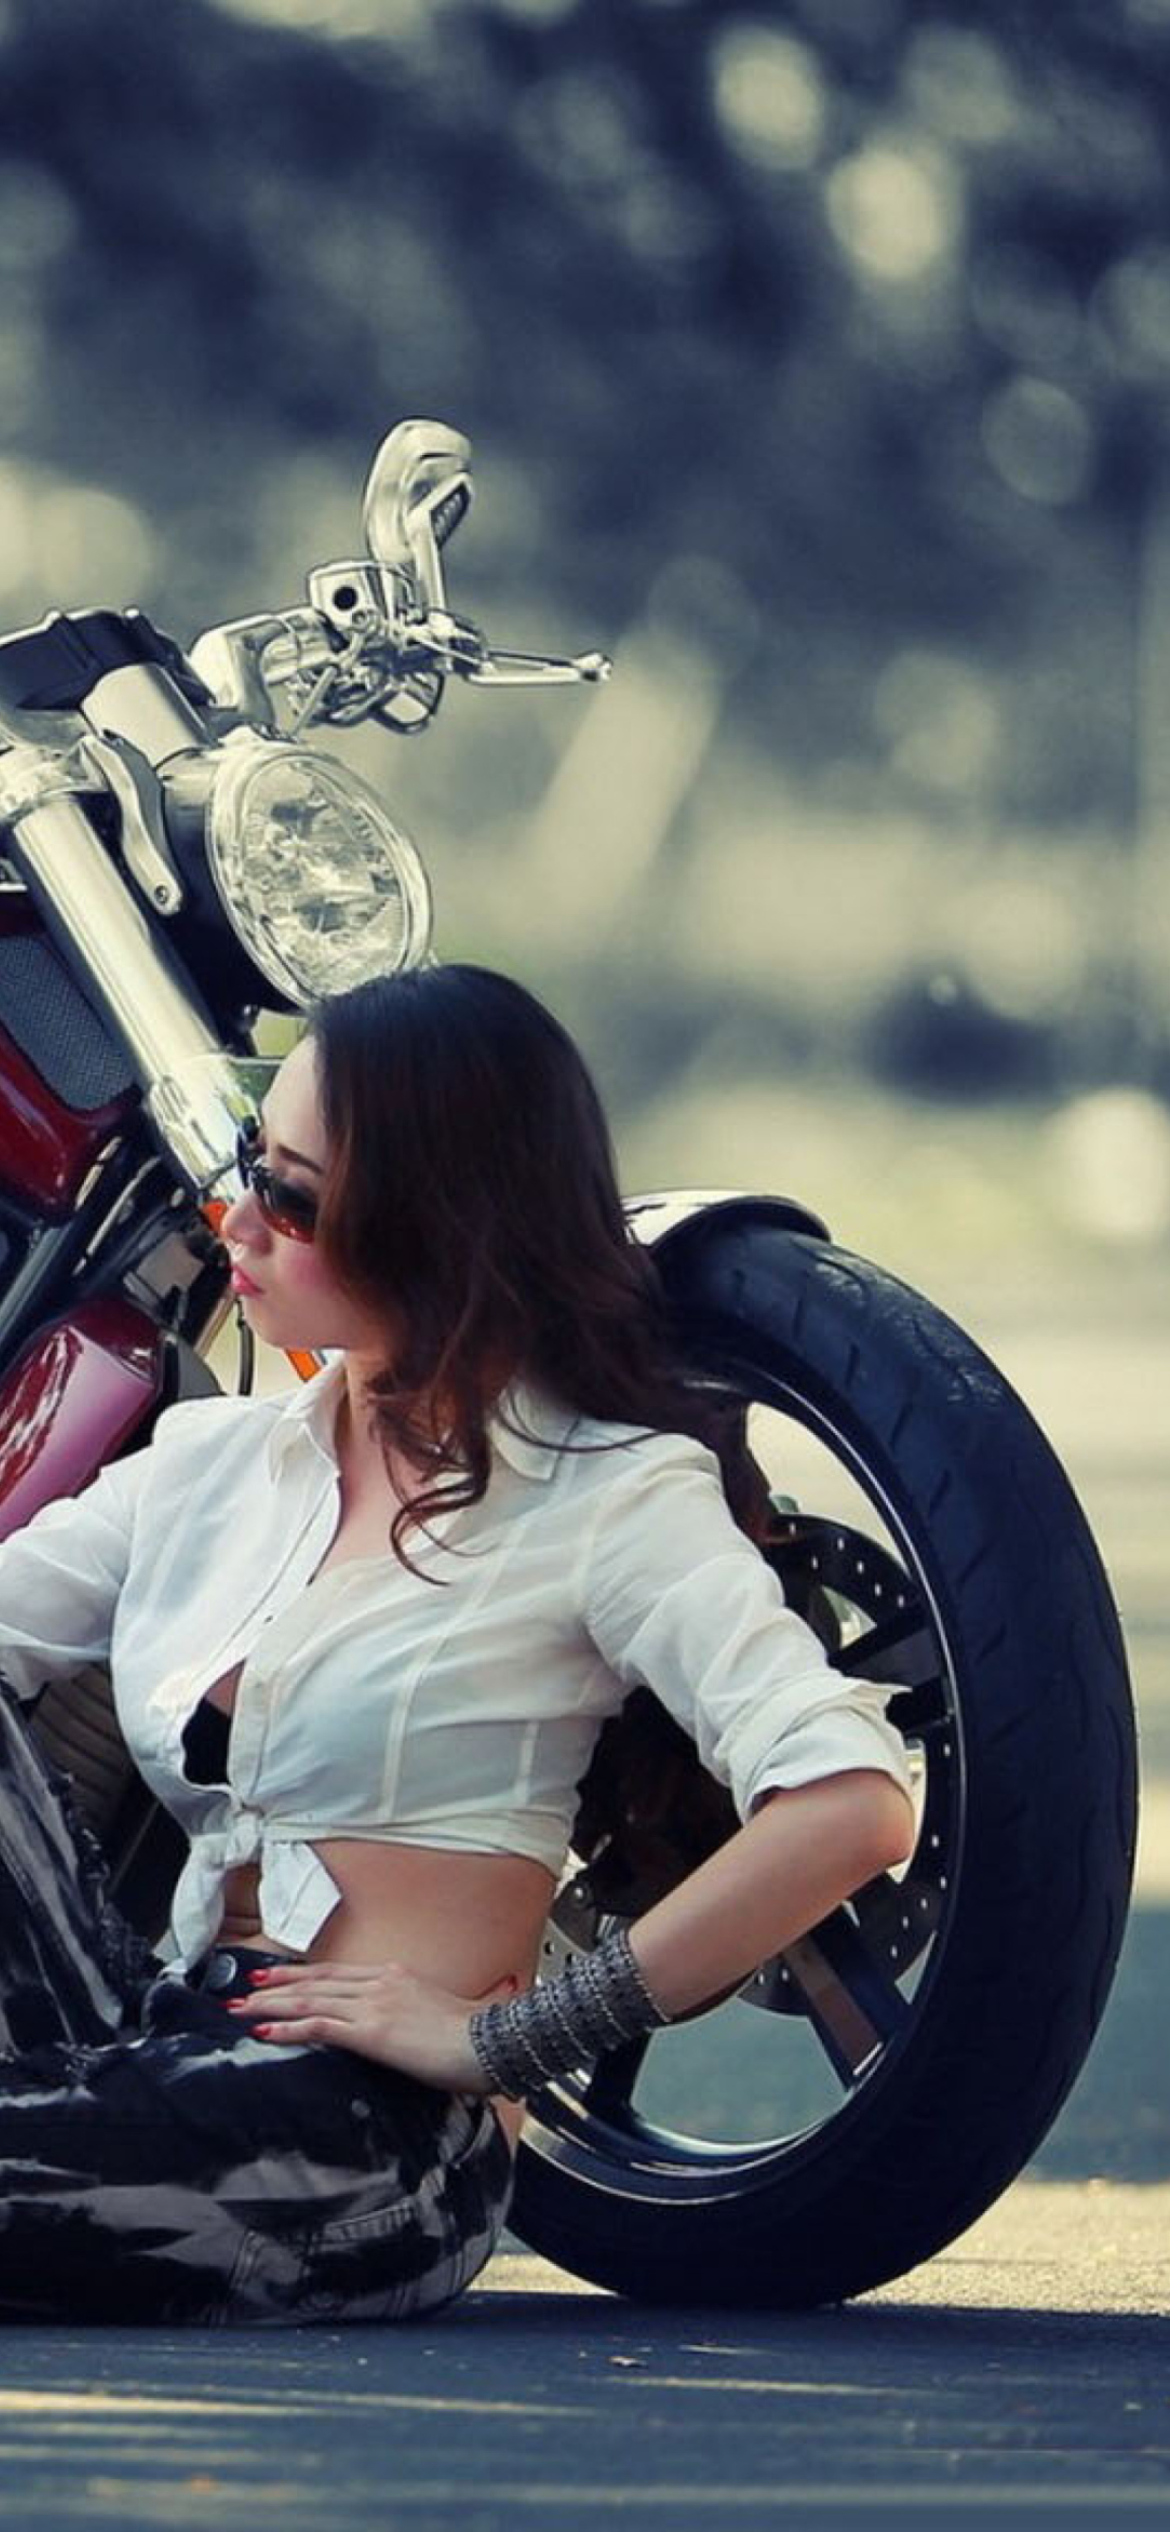 Wallpaper | Motorcycles | photo | picture | motorcycle, the bike, ducati,  girl, model